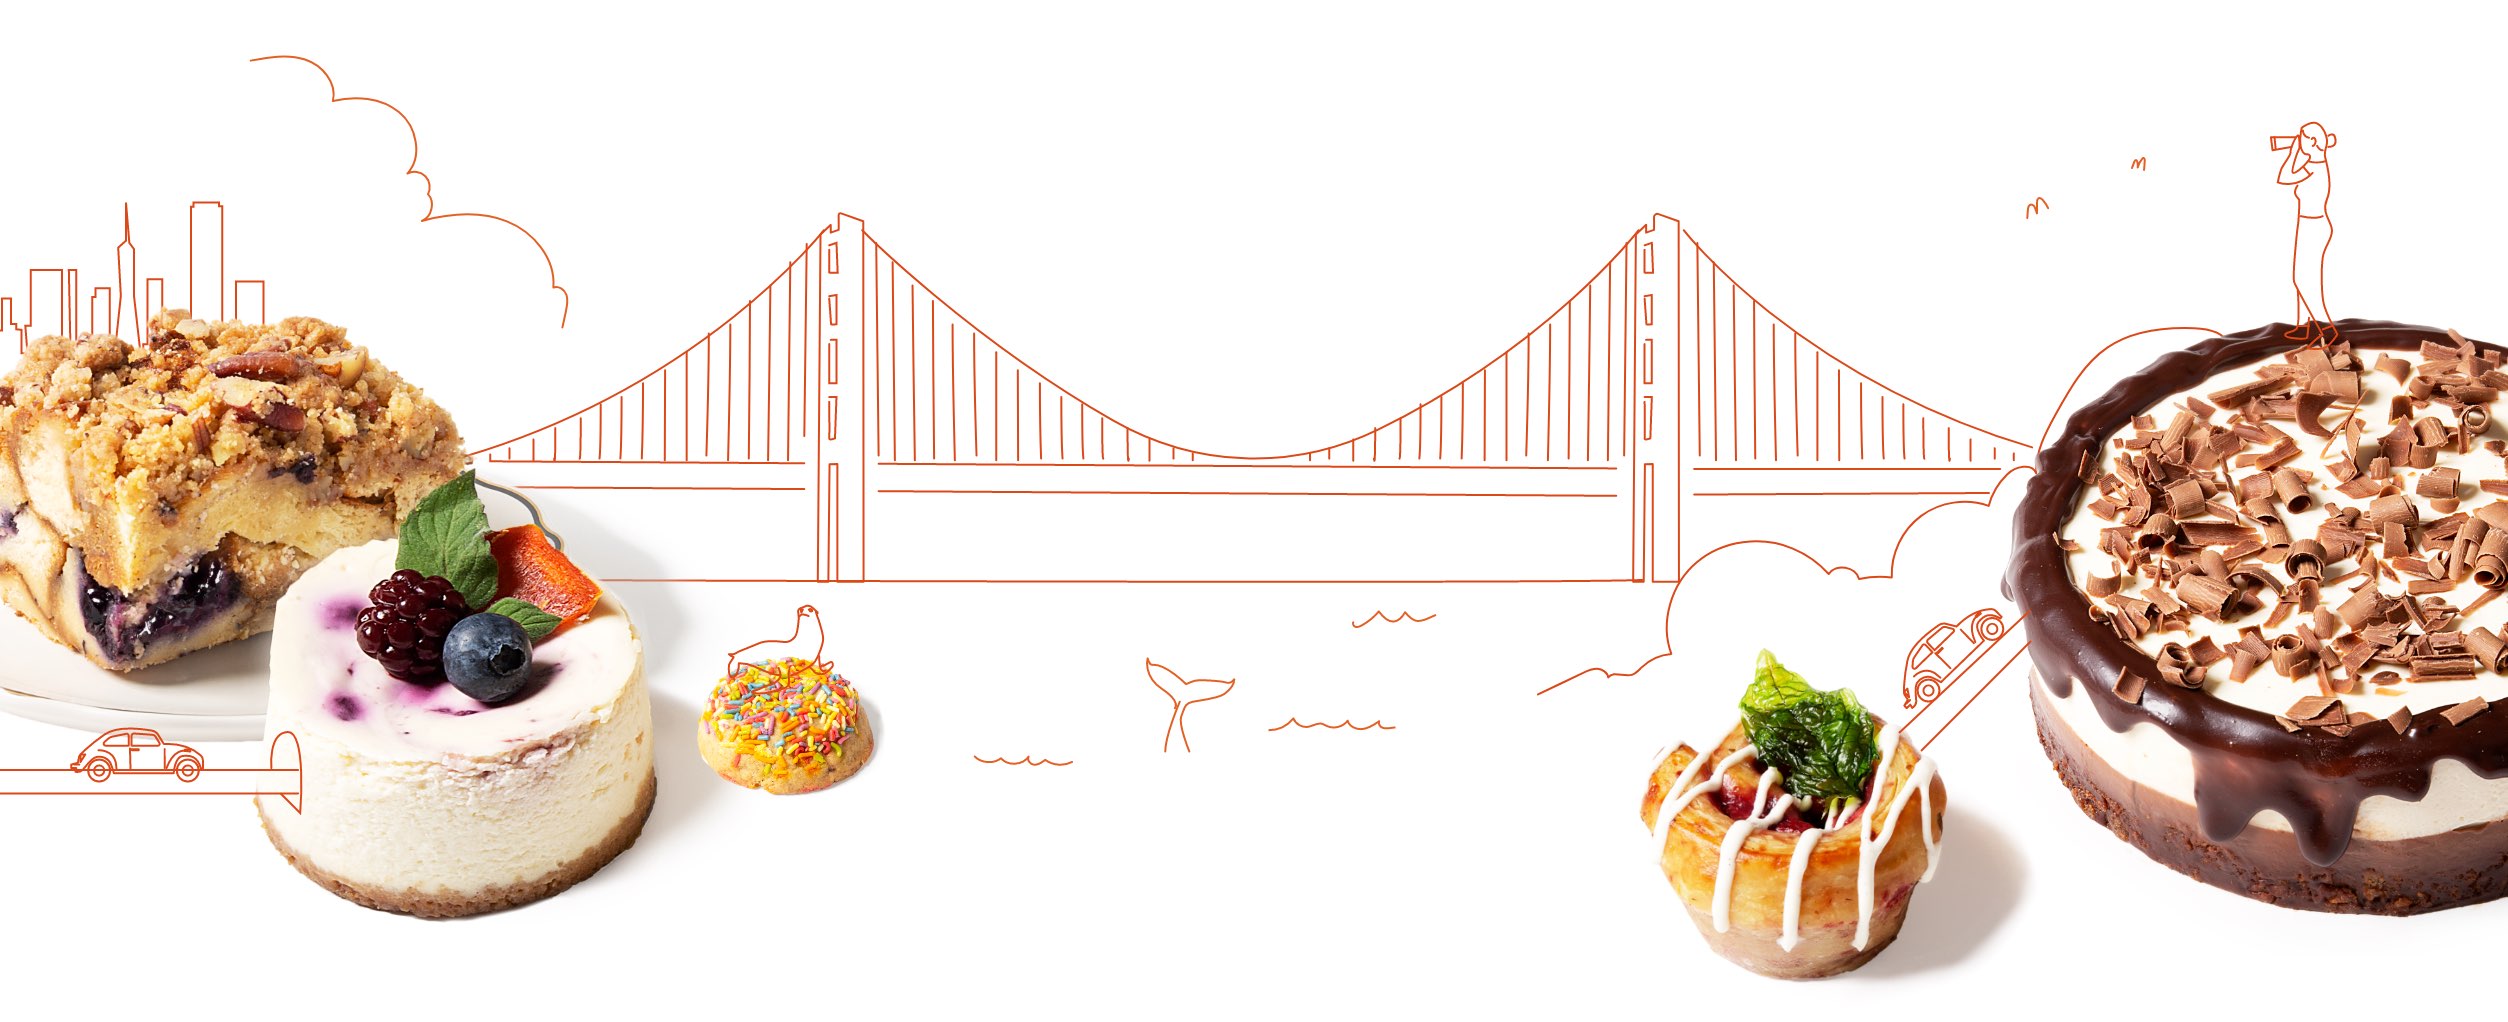 Branded illustration of the Golden Gate Bridge layered with playful product photos